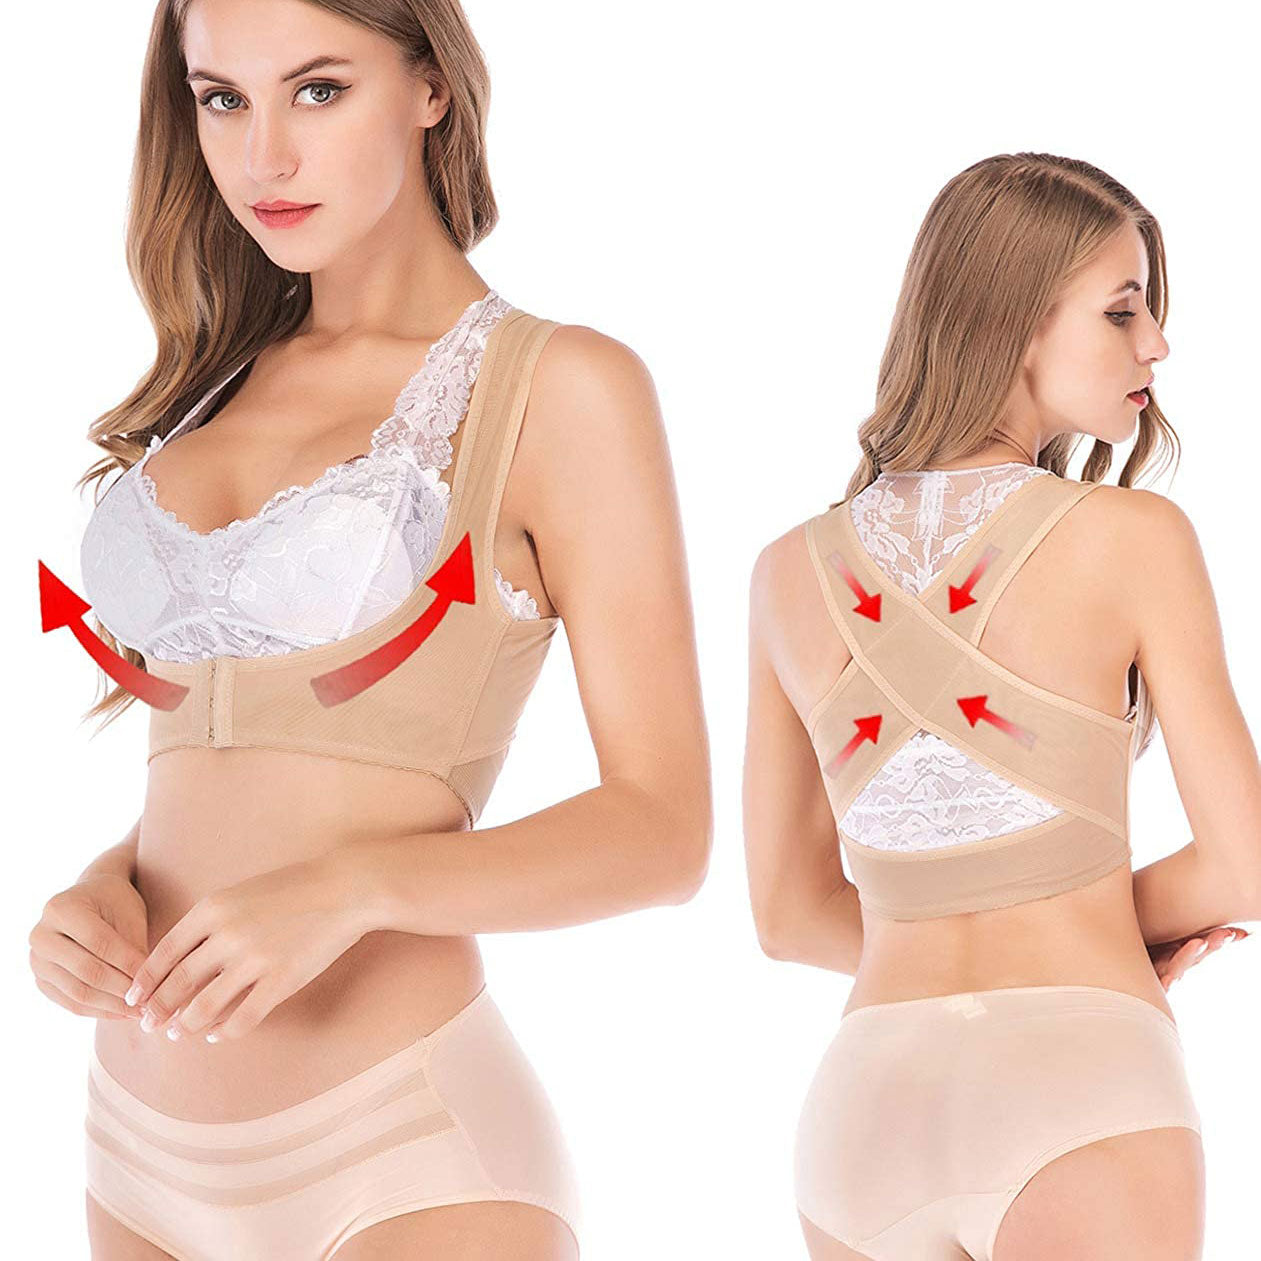 X Strap Bra Support for Women Chest Brace up Posture Corrector Shapewear  Tops Vest Chest Breast Support